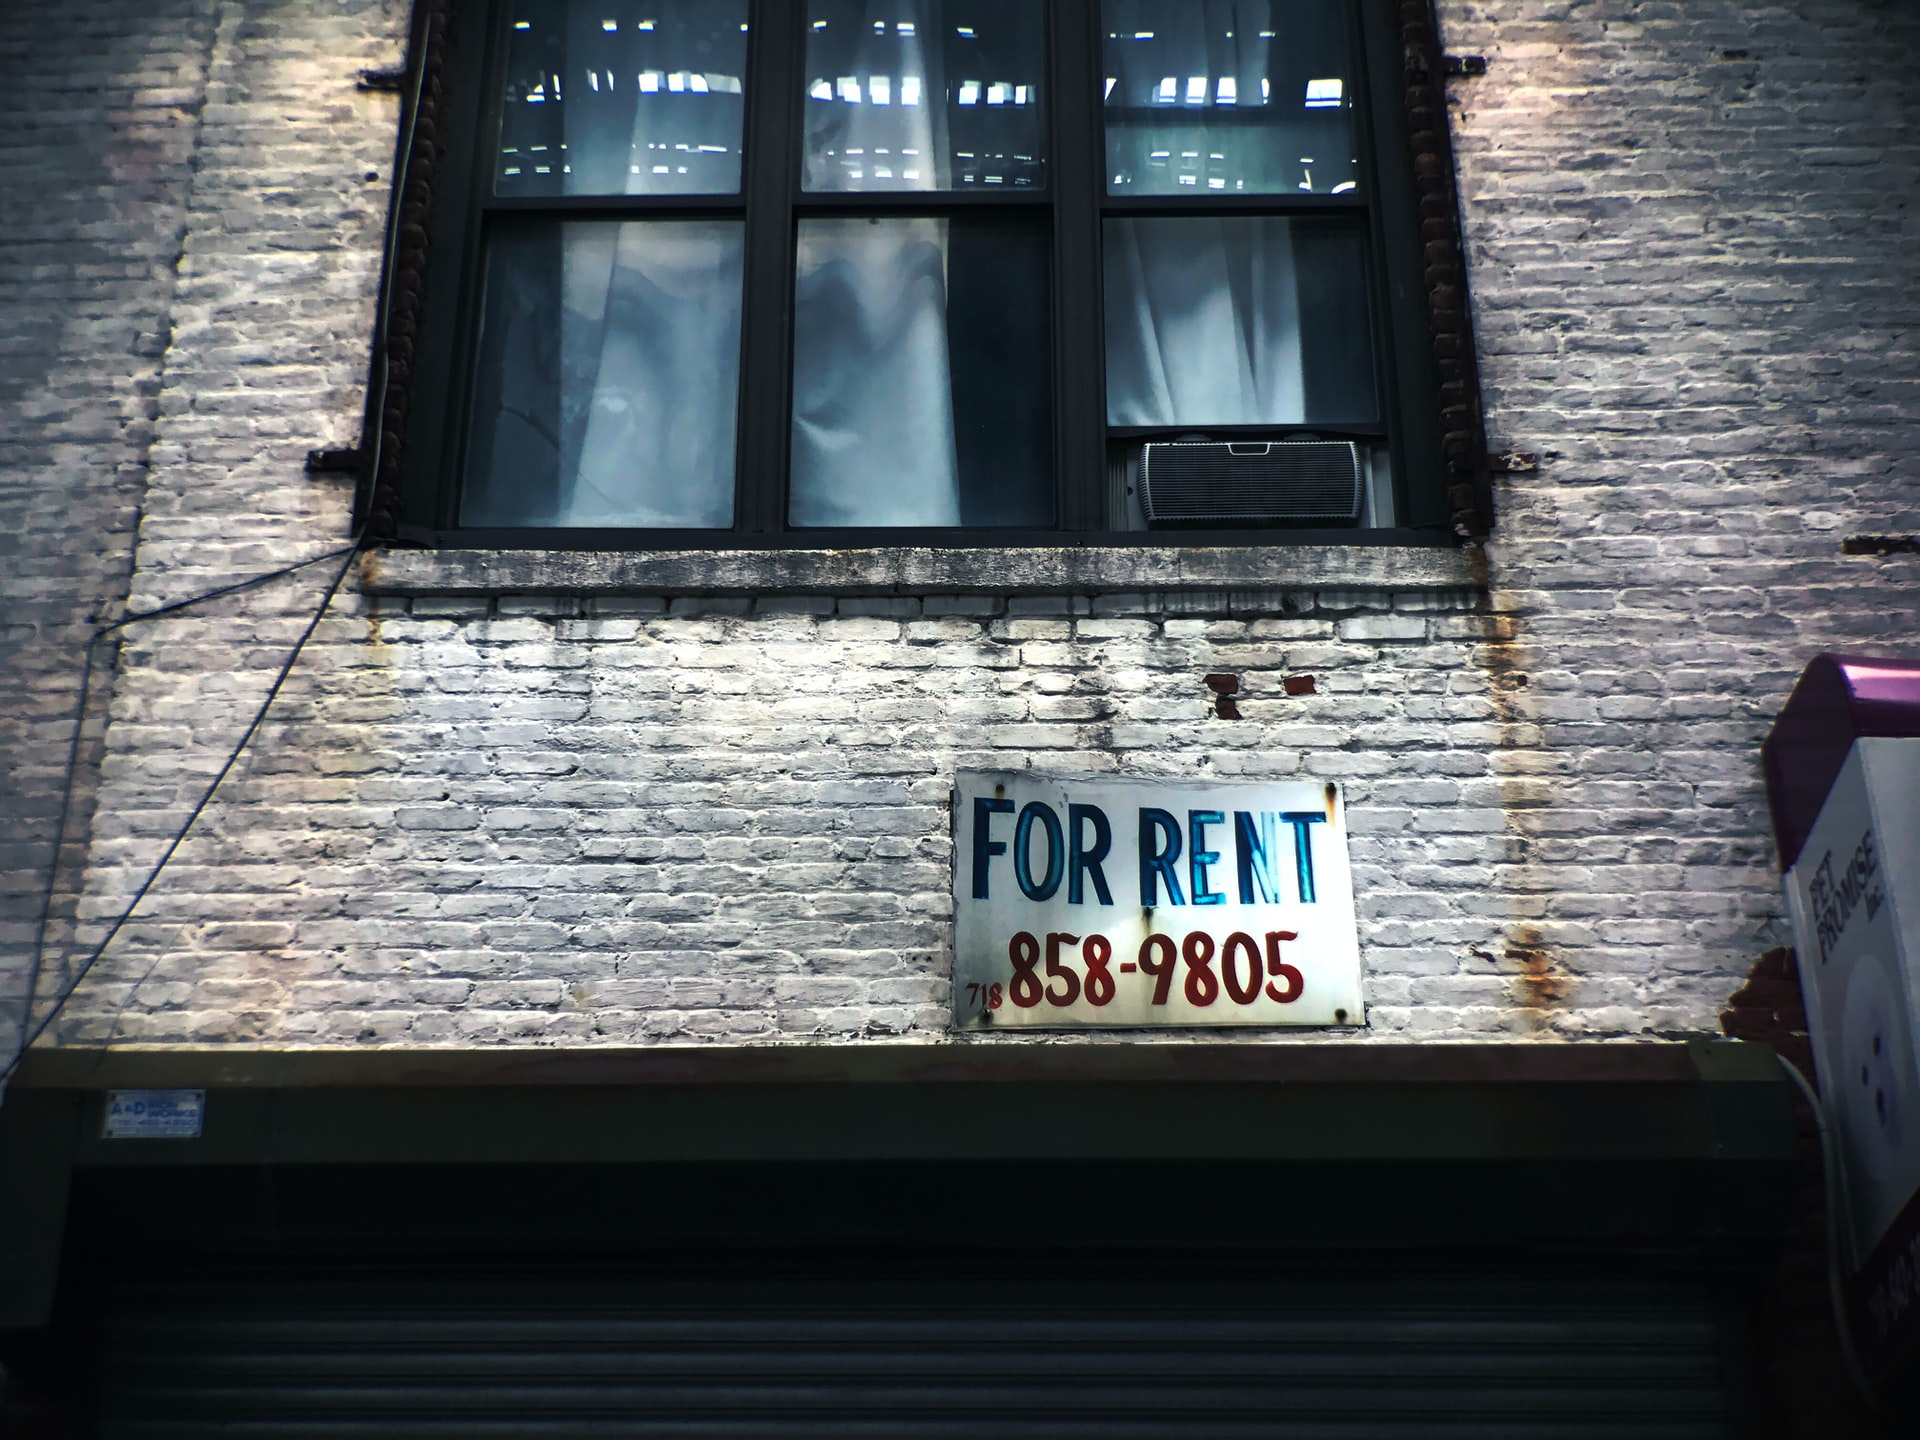 A "for rent" sign indicating a property for lease